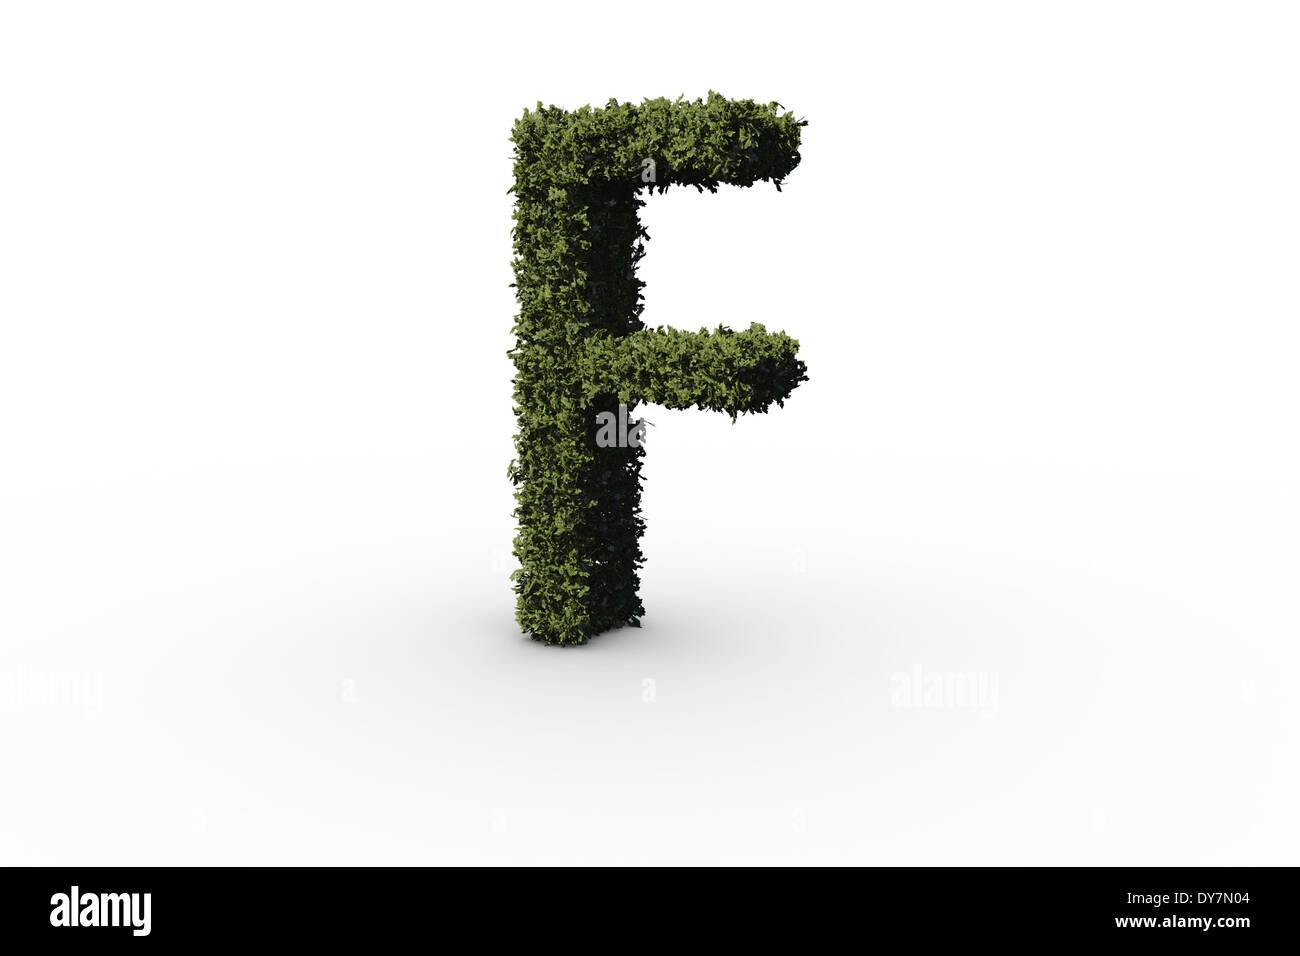 Capital letter f made of leaves Stock Photo